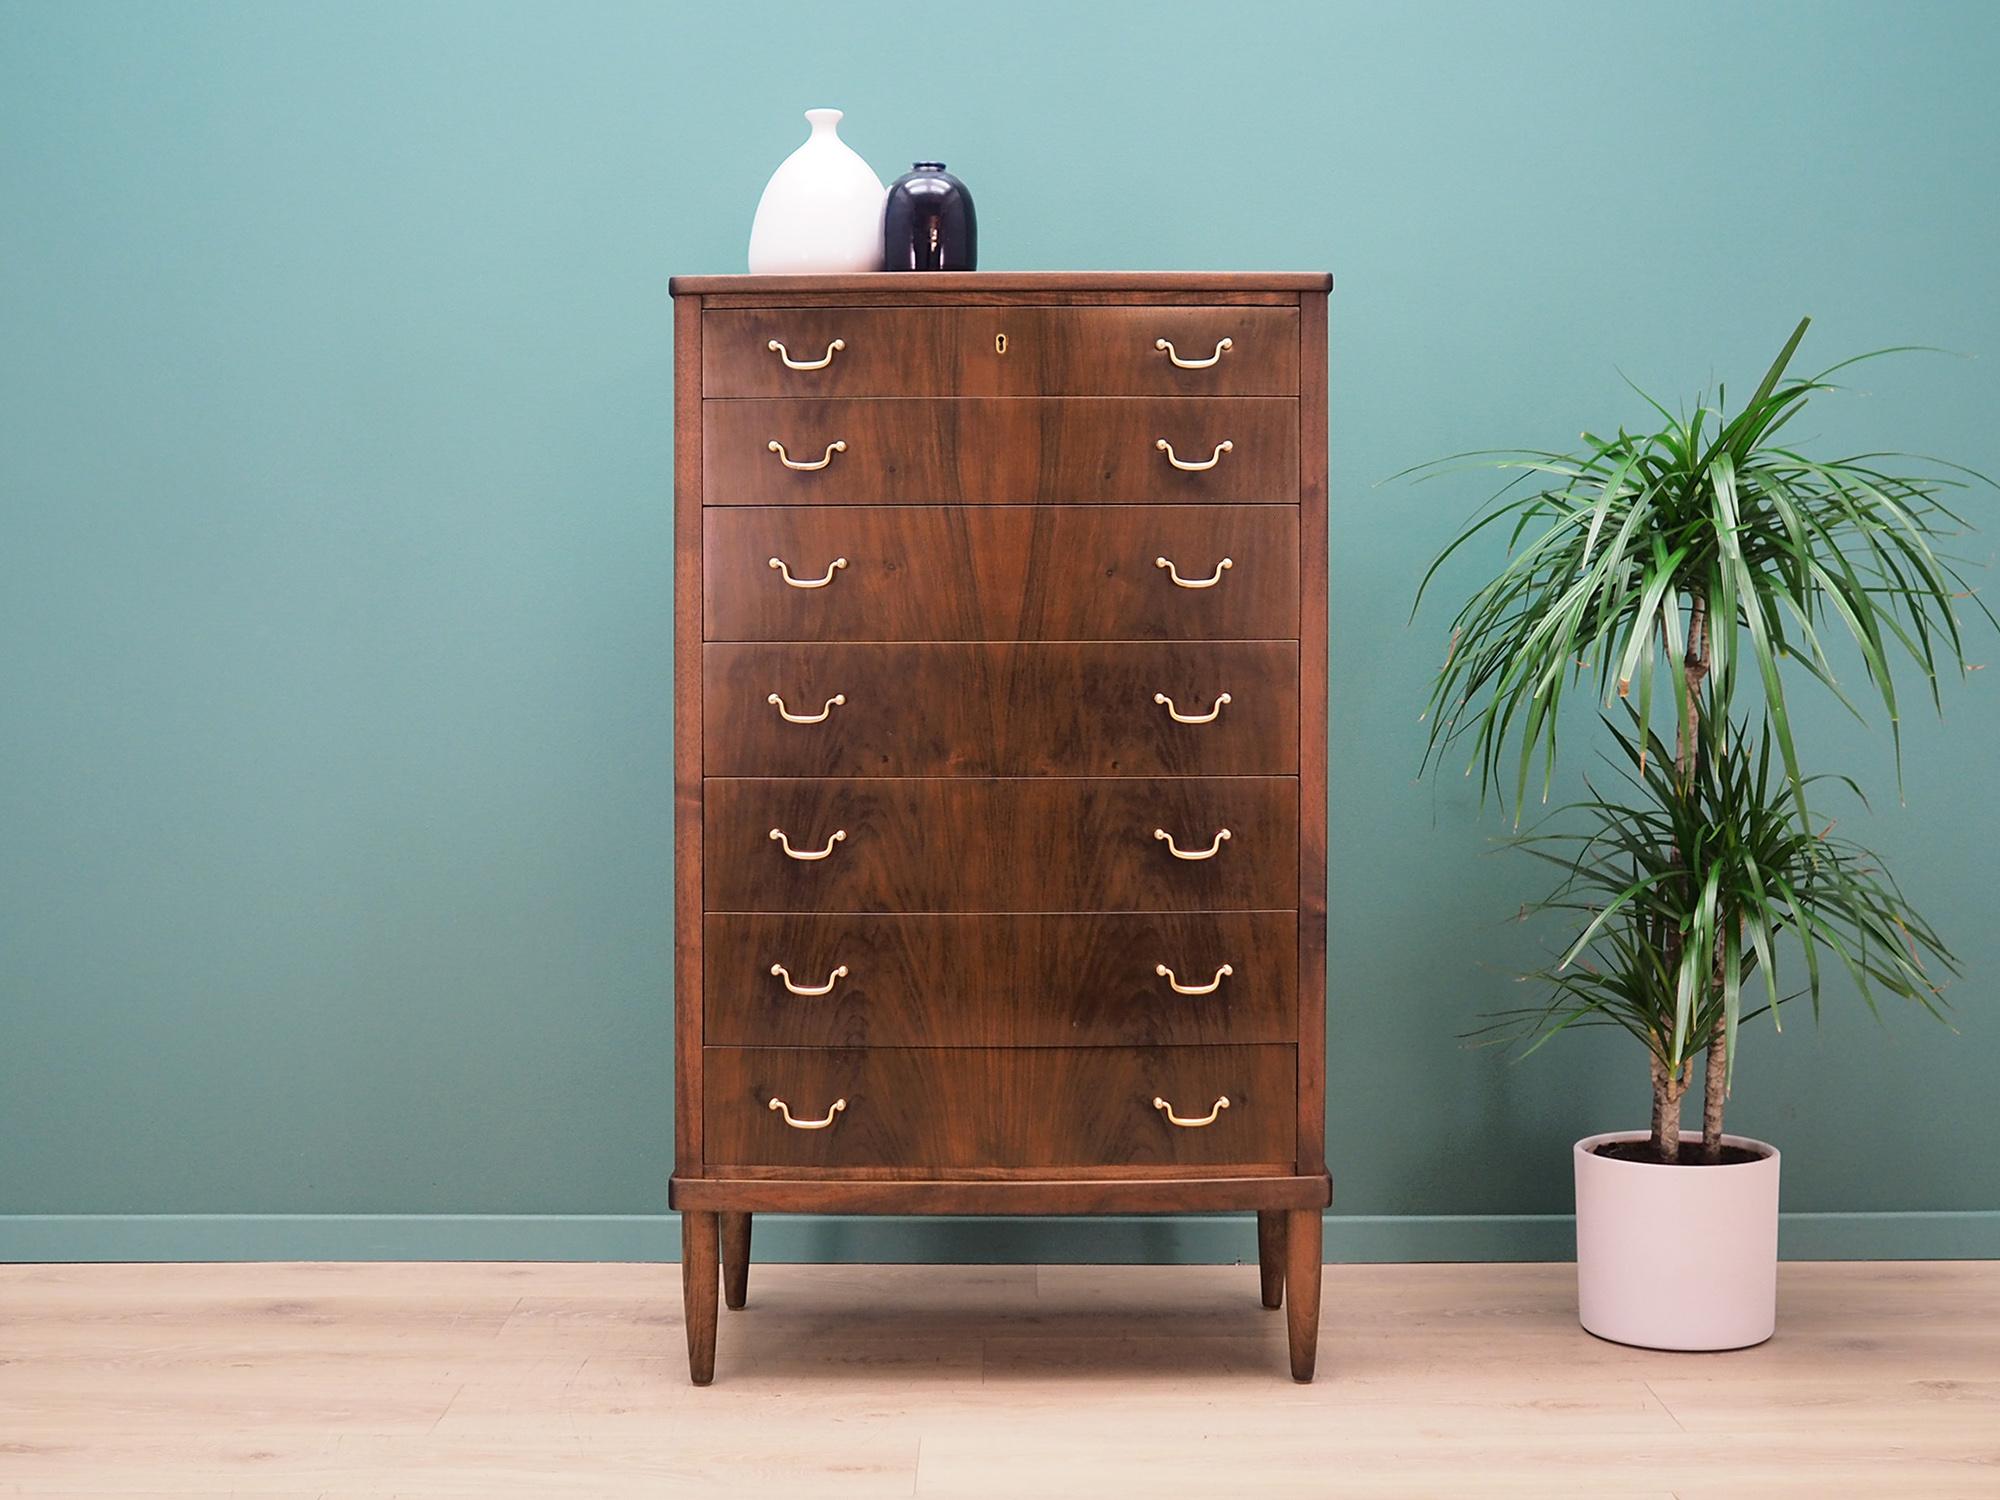 The chest of drawers was made in the 1960s, Danish production.

The construction is covered with walnut veneer. The legs are made of solid walnut wood, the handles are made of metal. The surface after refreshing. The cabinet is a classic chest of